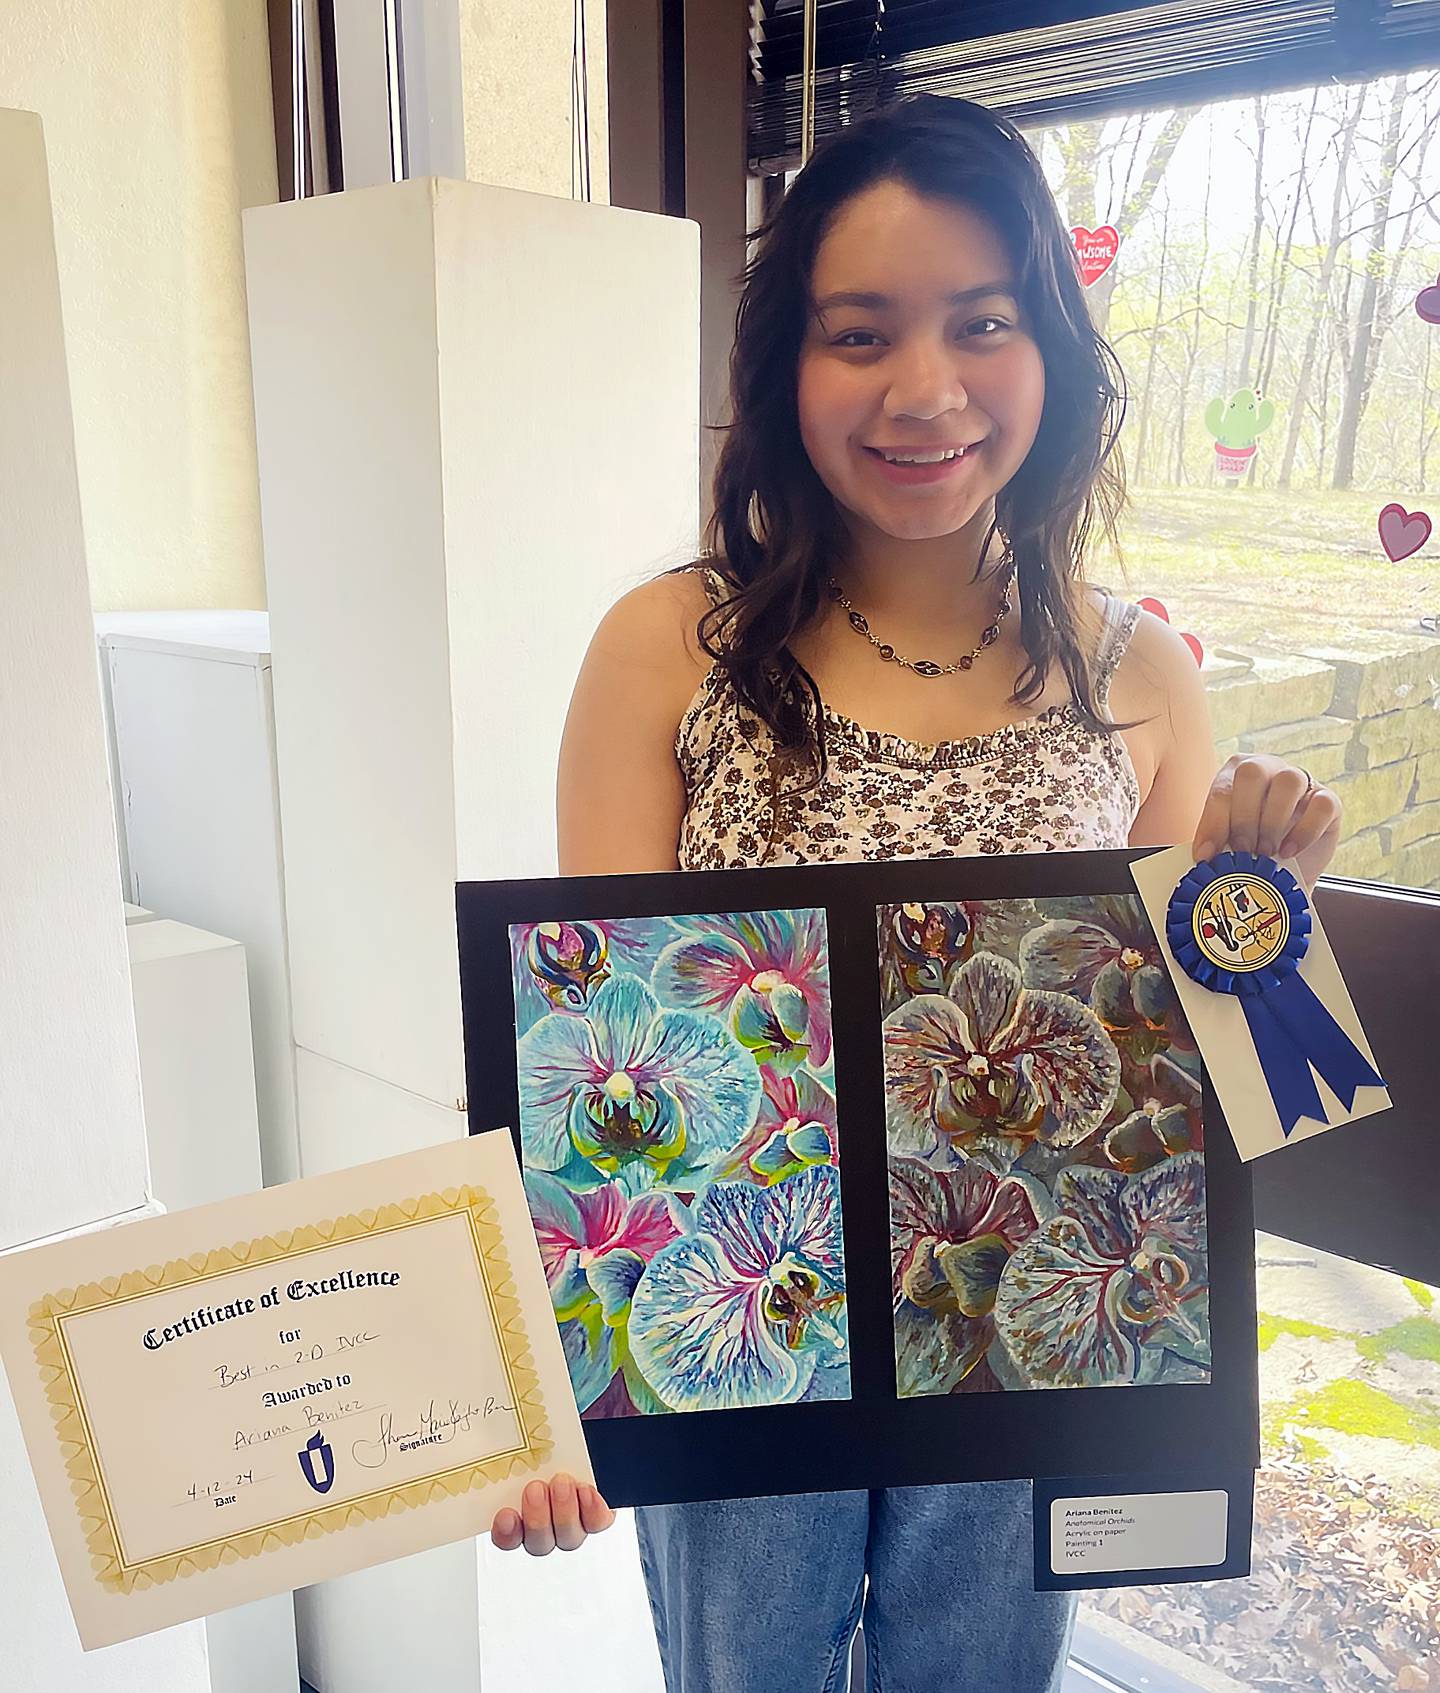 Ariana Benitez received first place in the College 2-D division at the Illinois Valley Community College Spring Art Show for her acrylic “Anatomical Orchids.” The show featured the works of artists from 10 area high schools and IVCC.